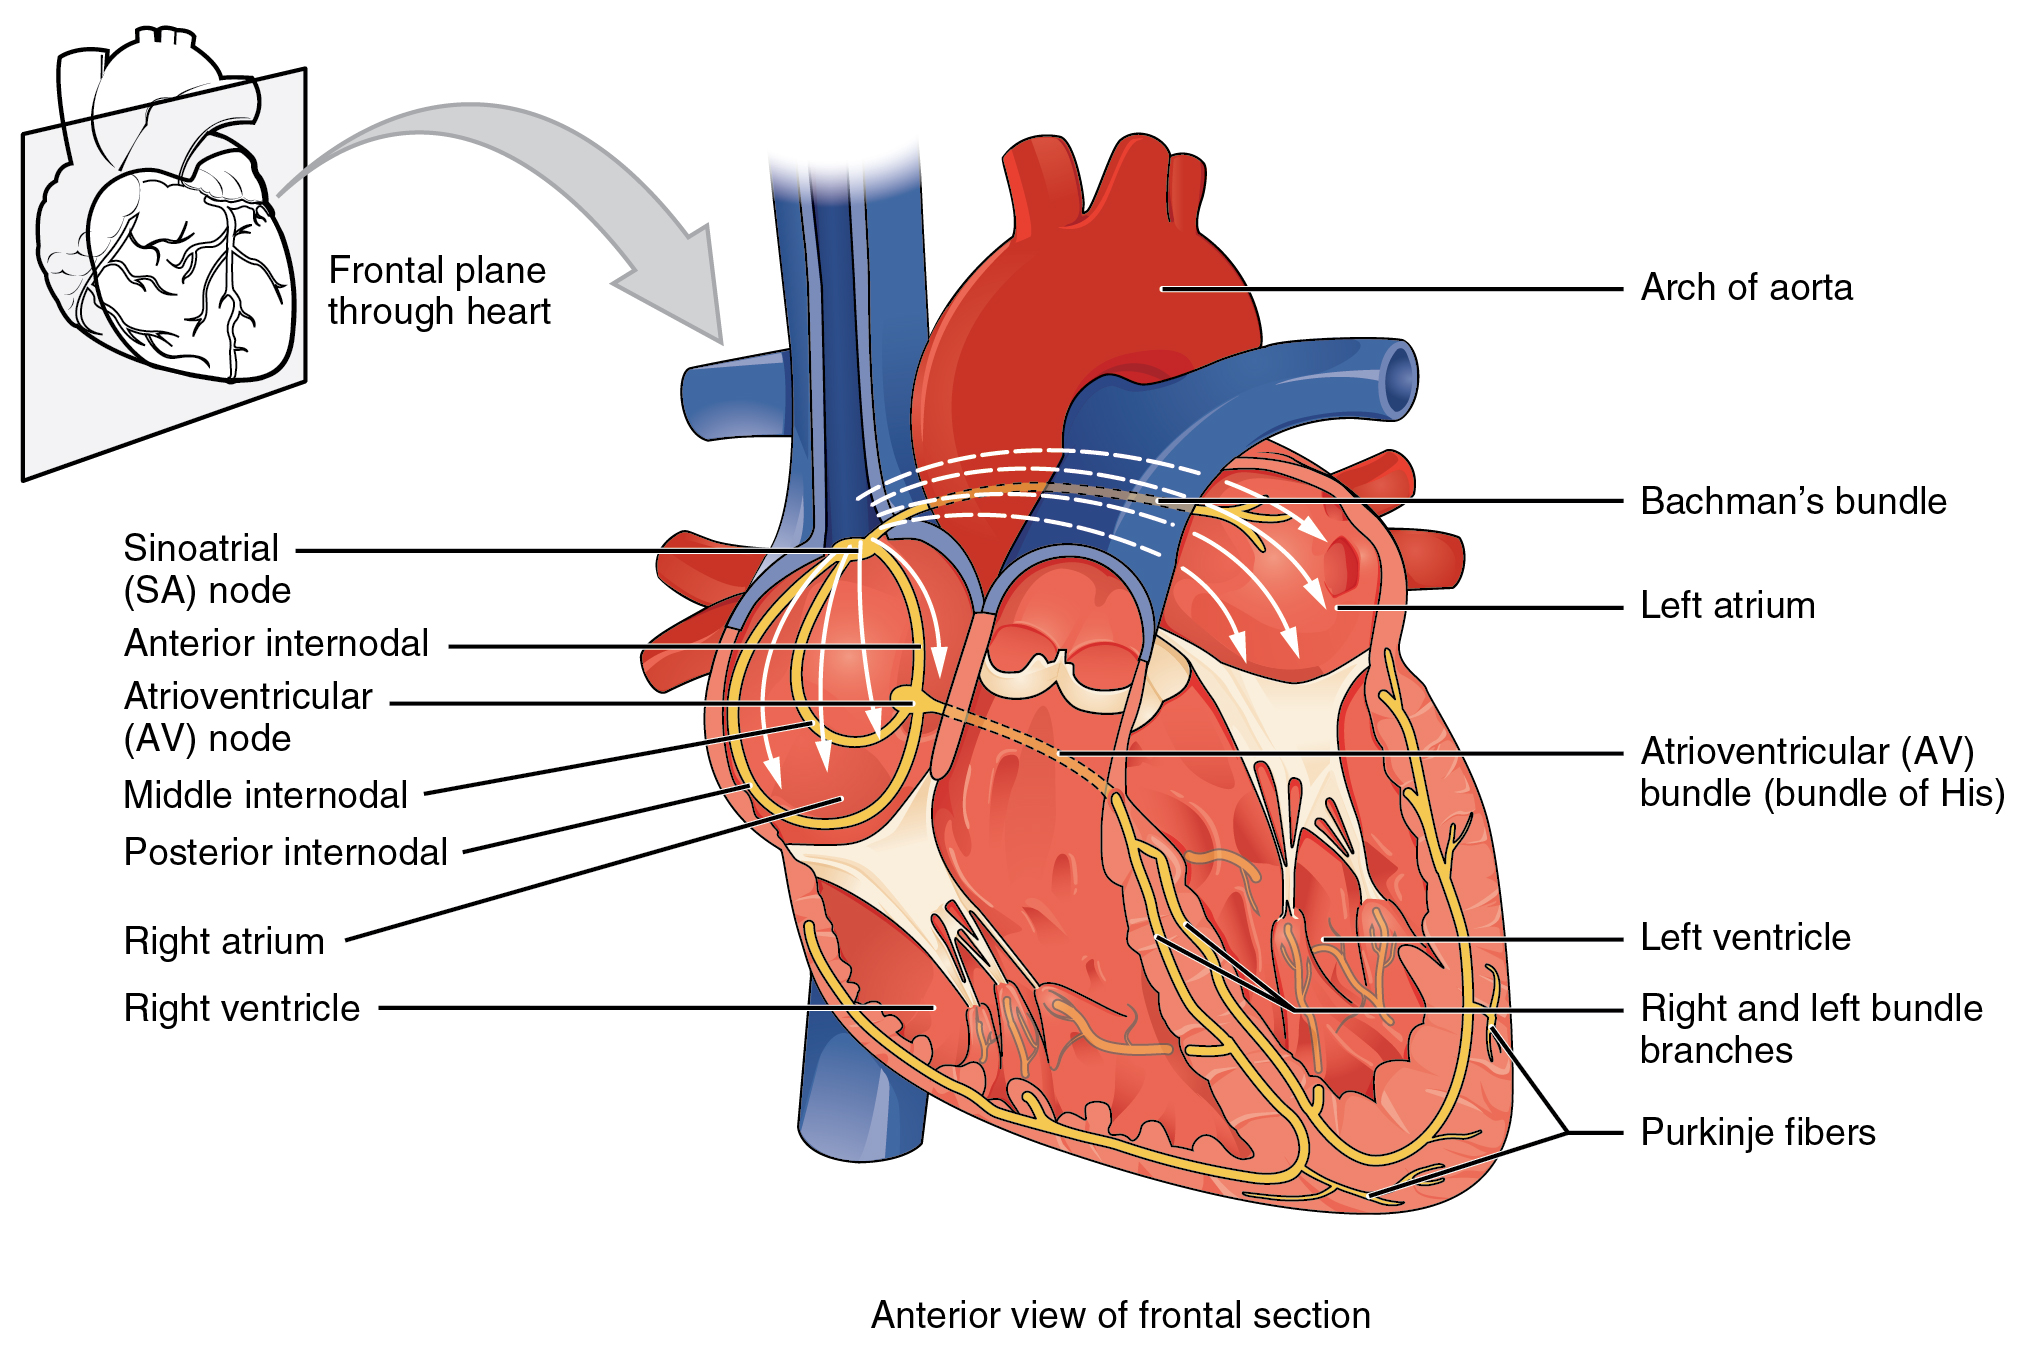 Illustration, with labels, showing anterior view of frontal section and frontal plane through heart.